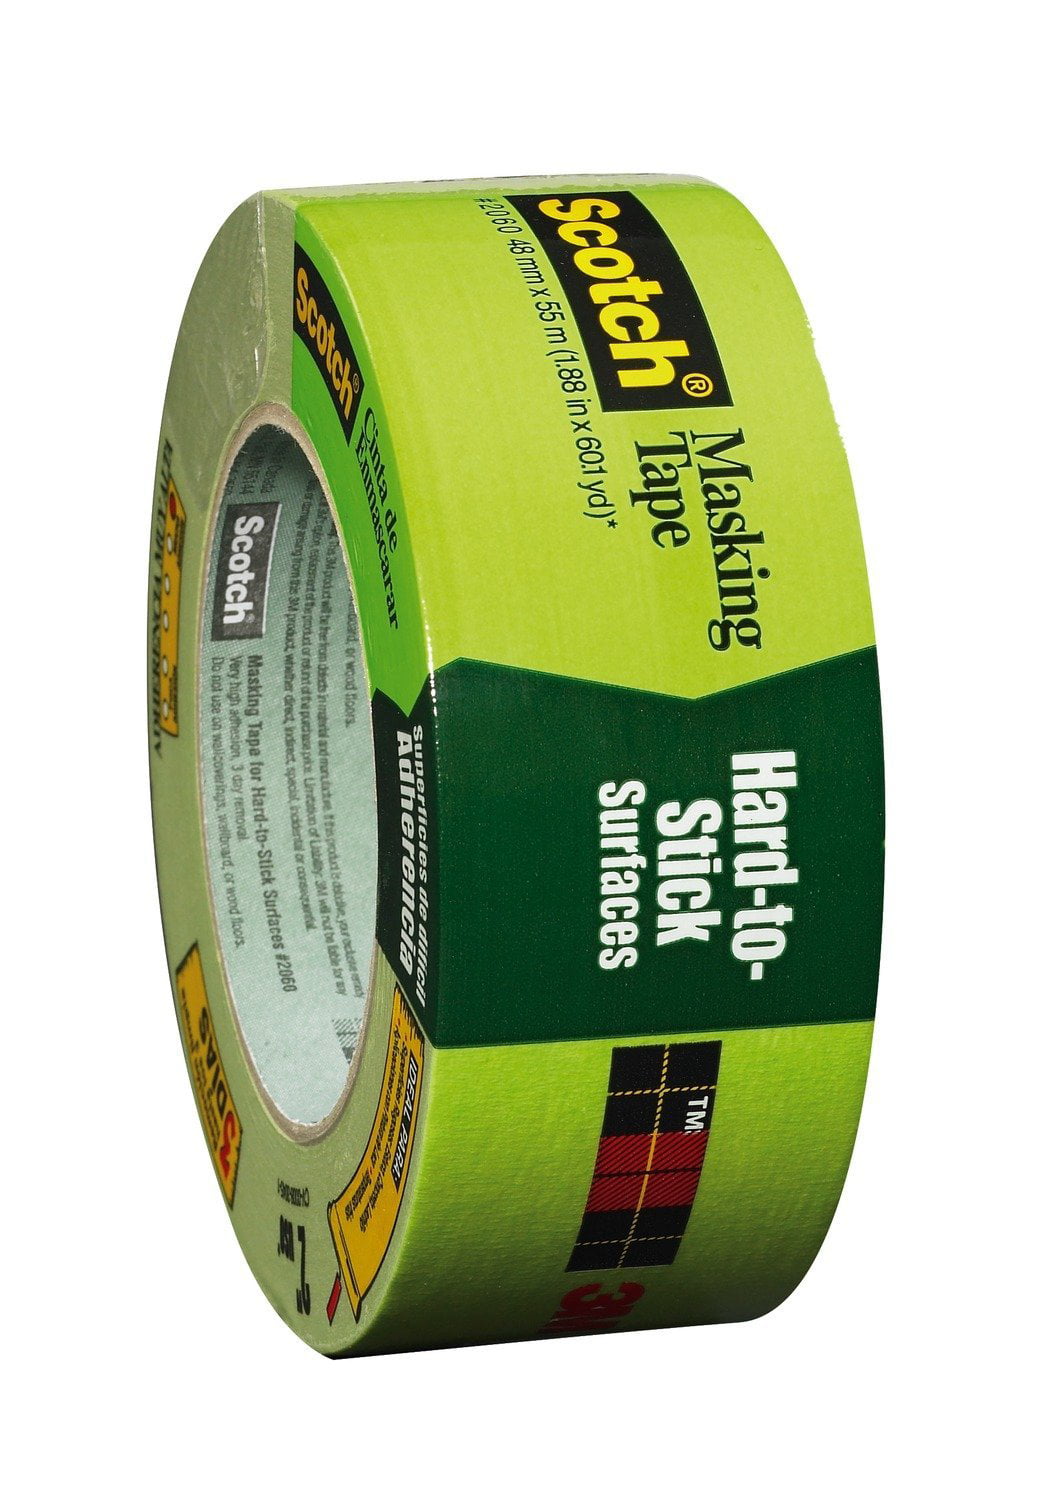 3M Scotch No 2060 36mm x 55m Concrete Brick and Grout High Adhesion Masking Tape 